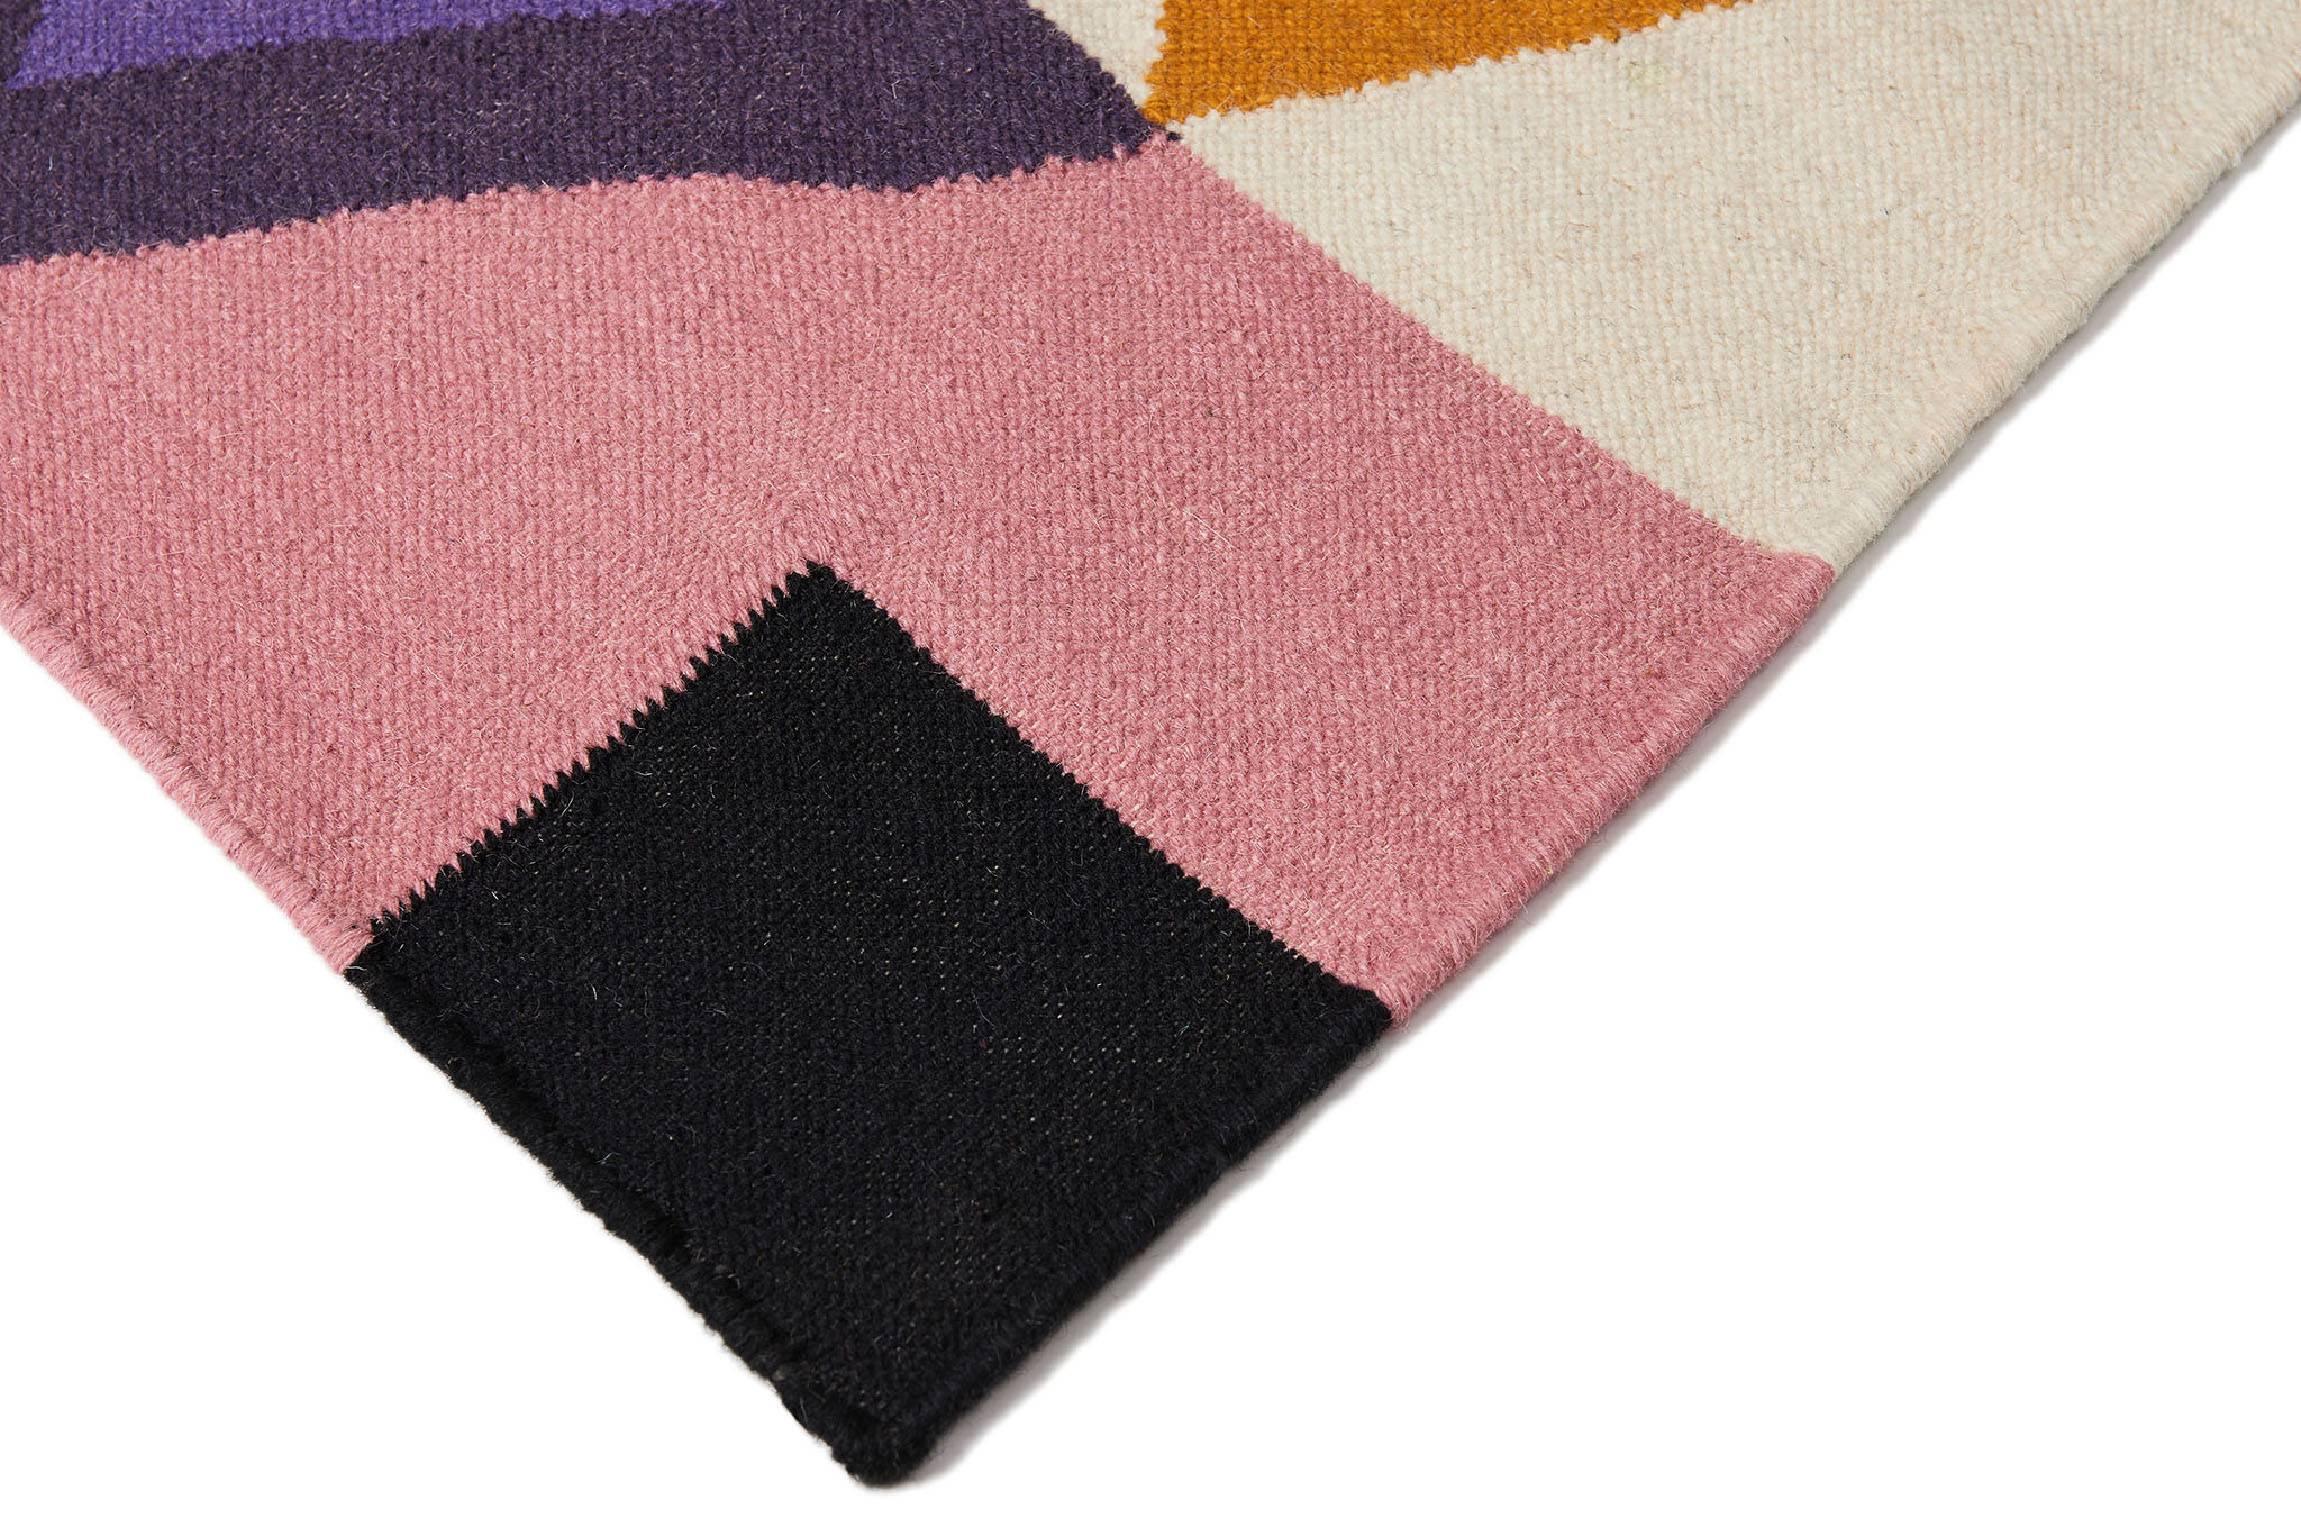 Modern, functional, sustainable. Make a statement with the Heatwave in Rajasthan design. It's is bold, colorful and unique. A Geometric handwoven Dhurrie rug with a modern fresh approach. Designed by AELFIE.